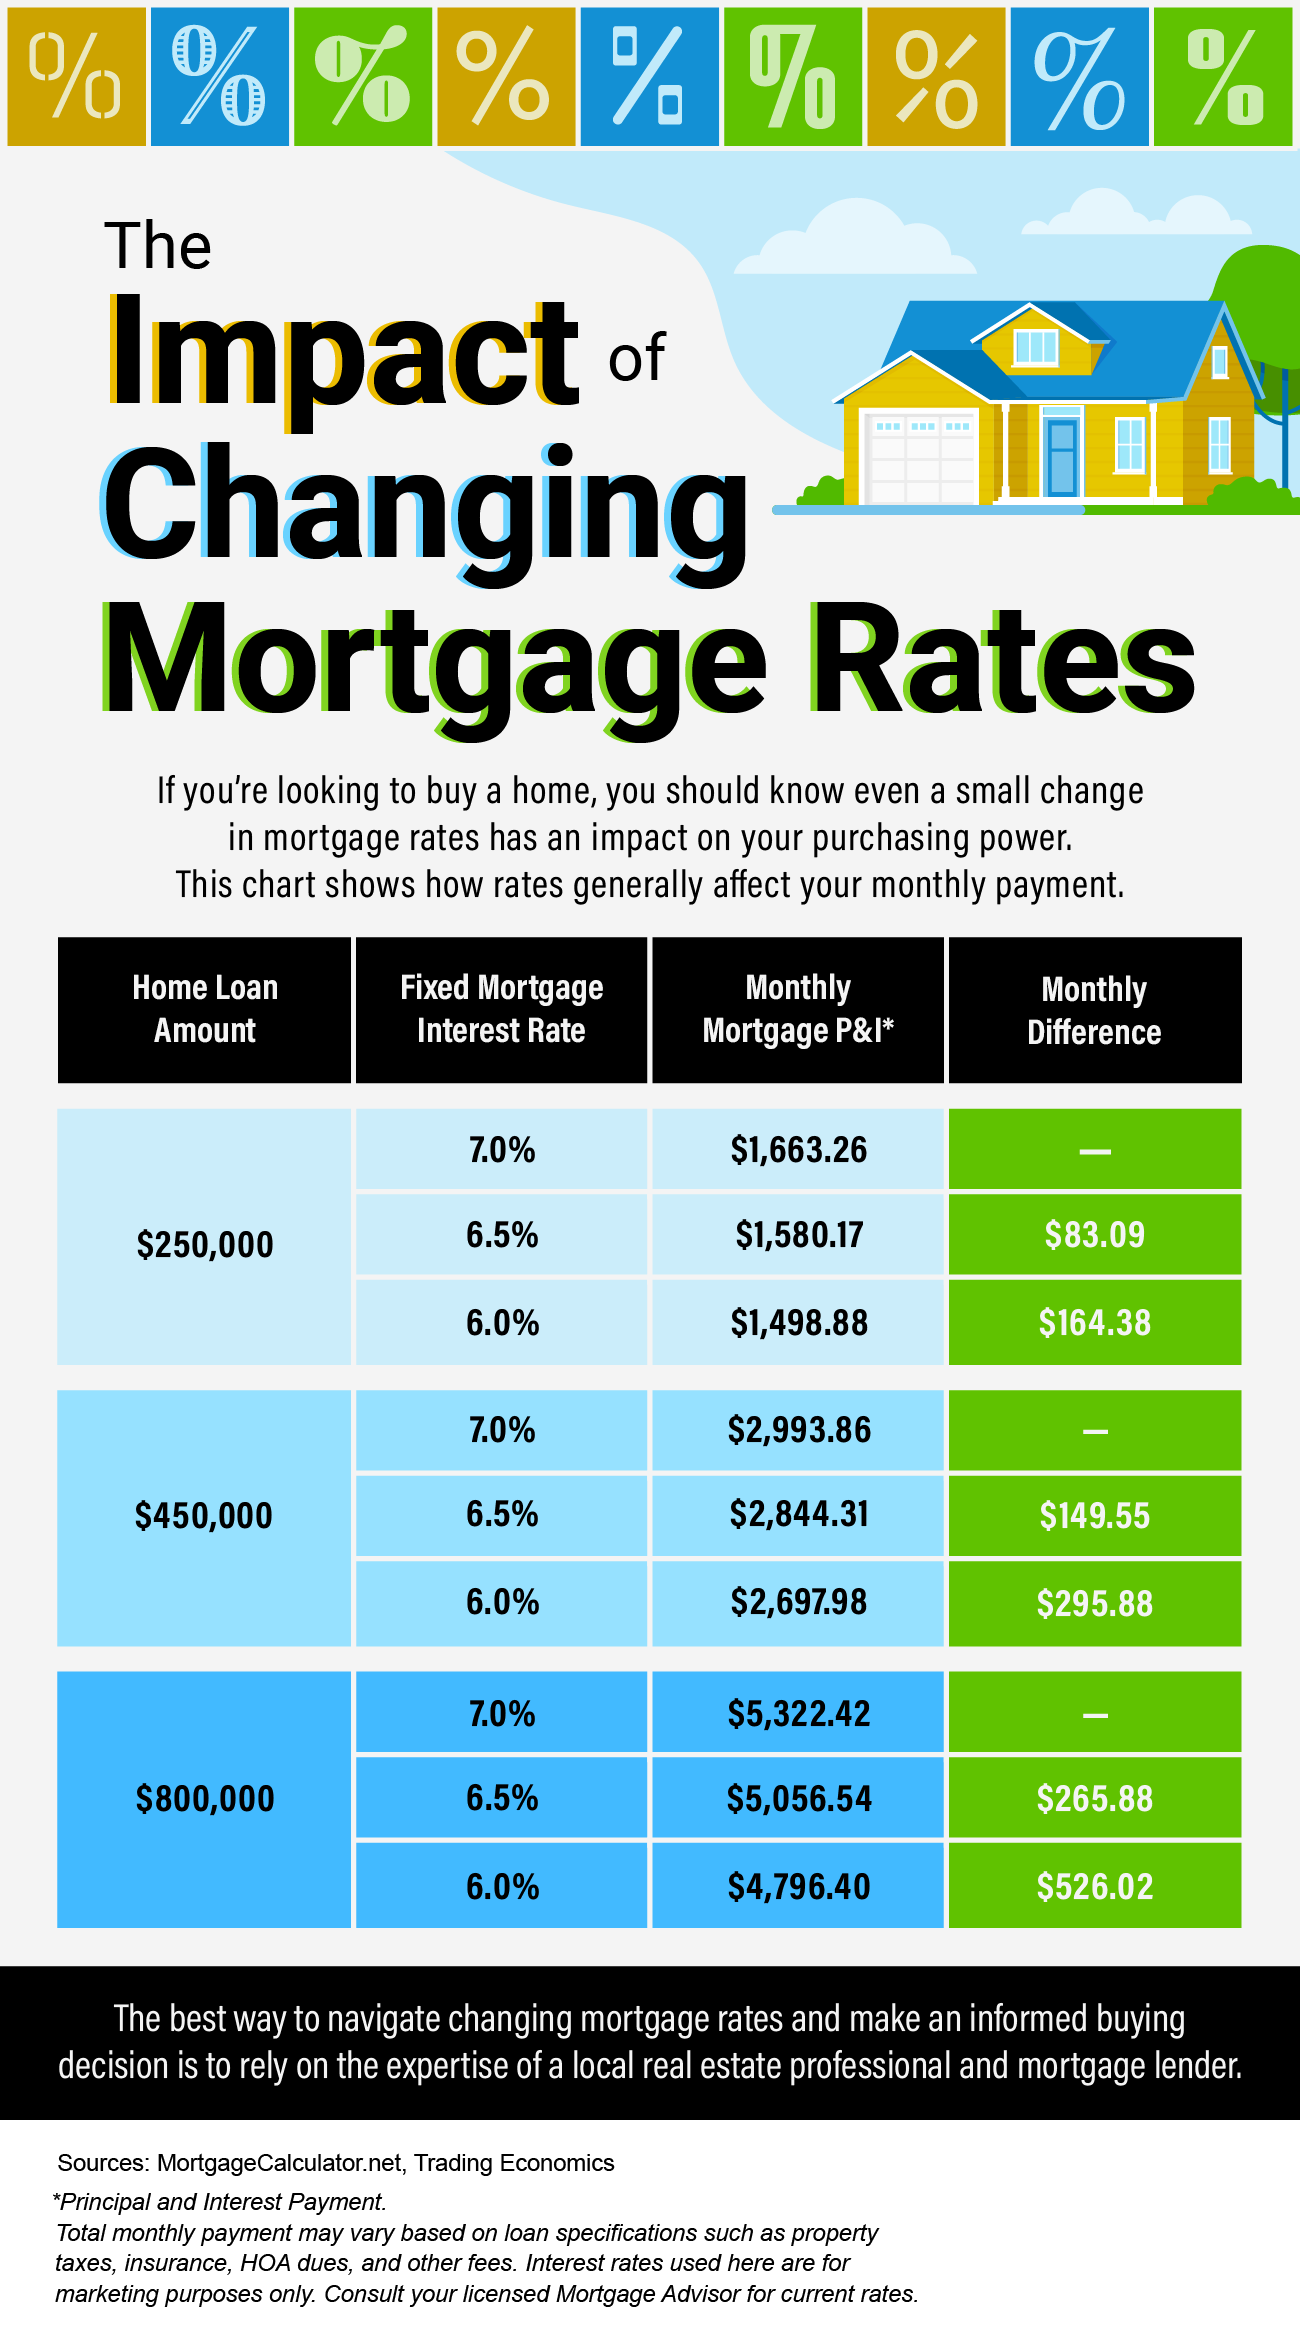 The Impact of Changing Mortgage Rates - KM Realty Group LLC, Chicago